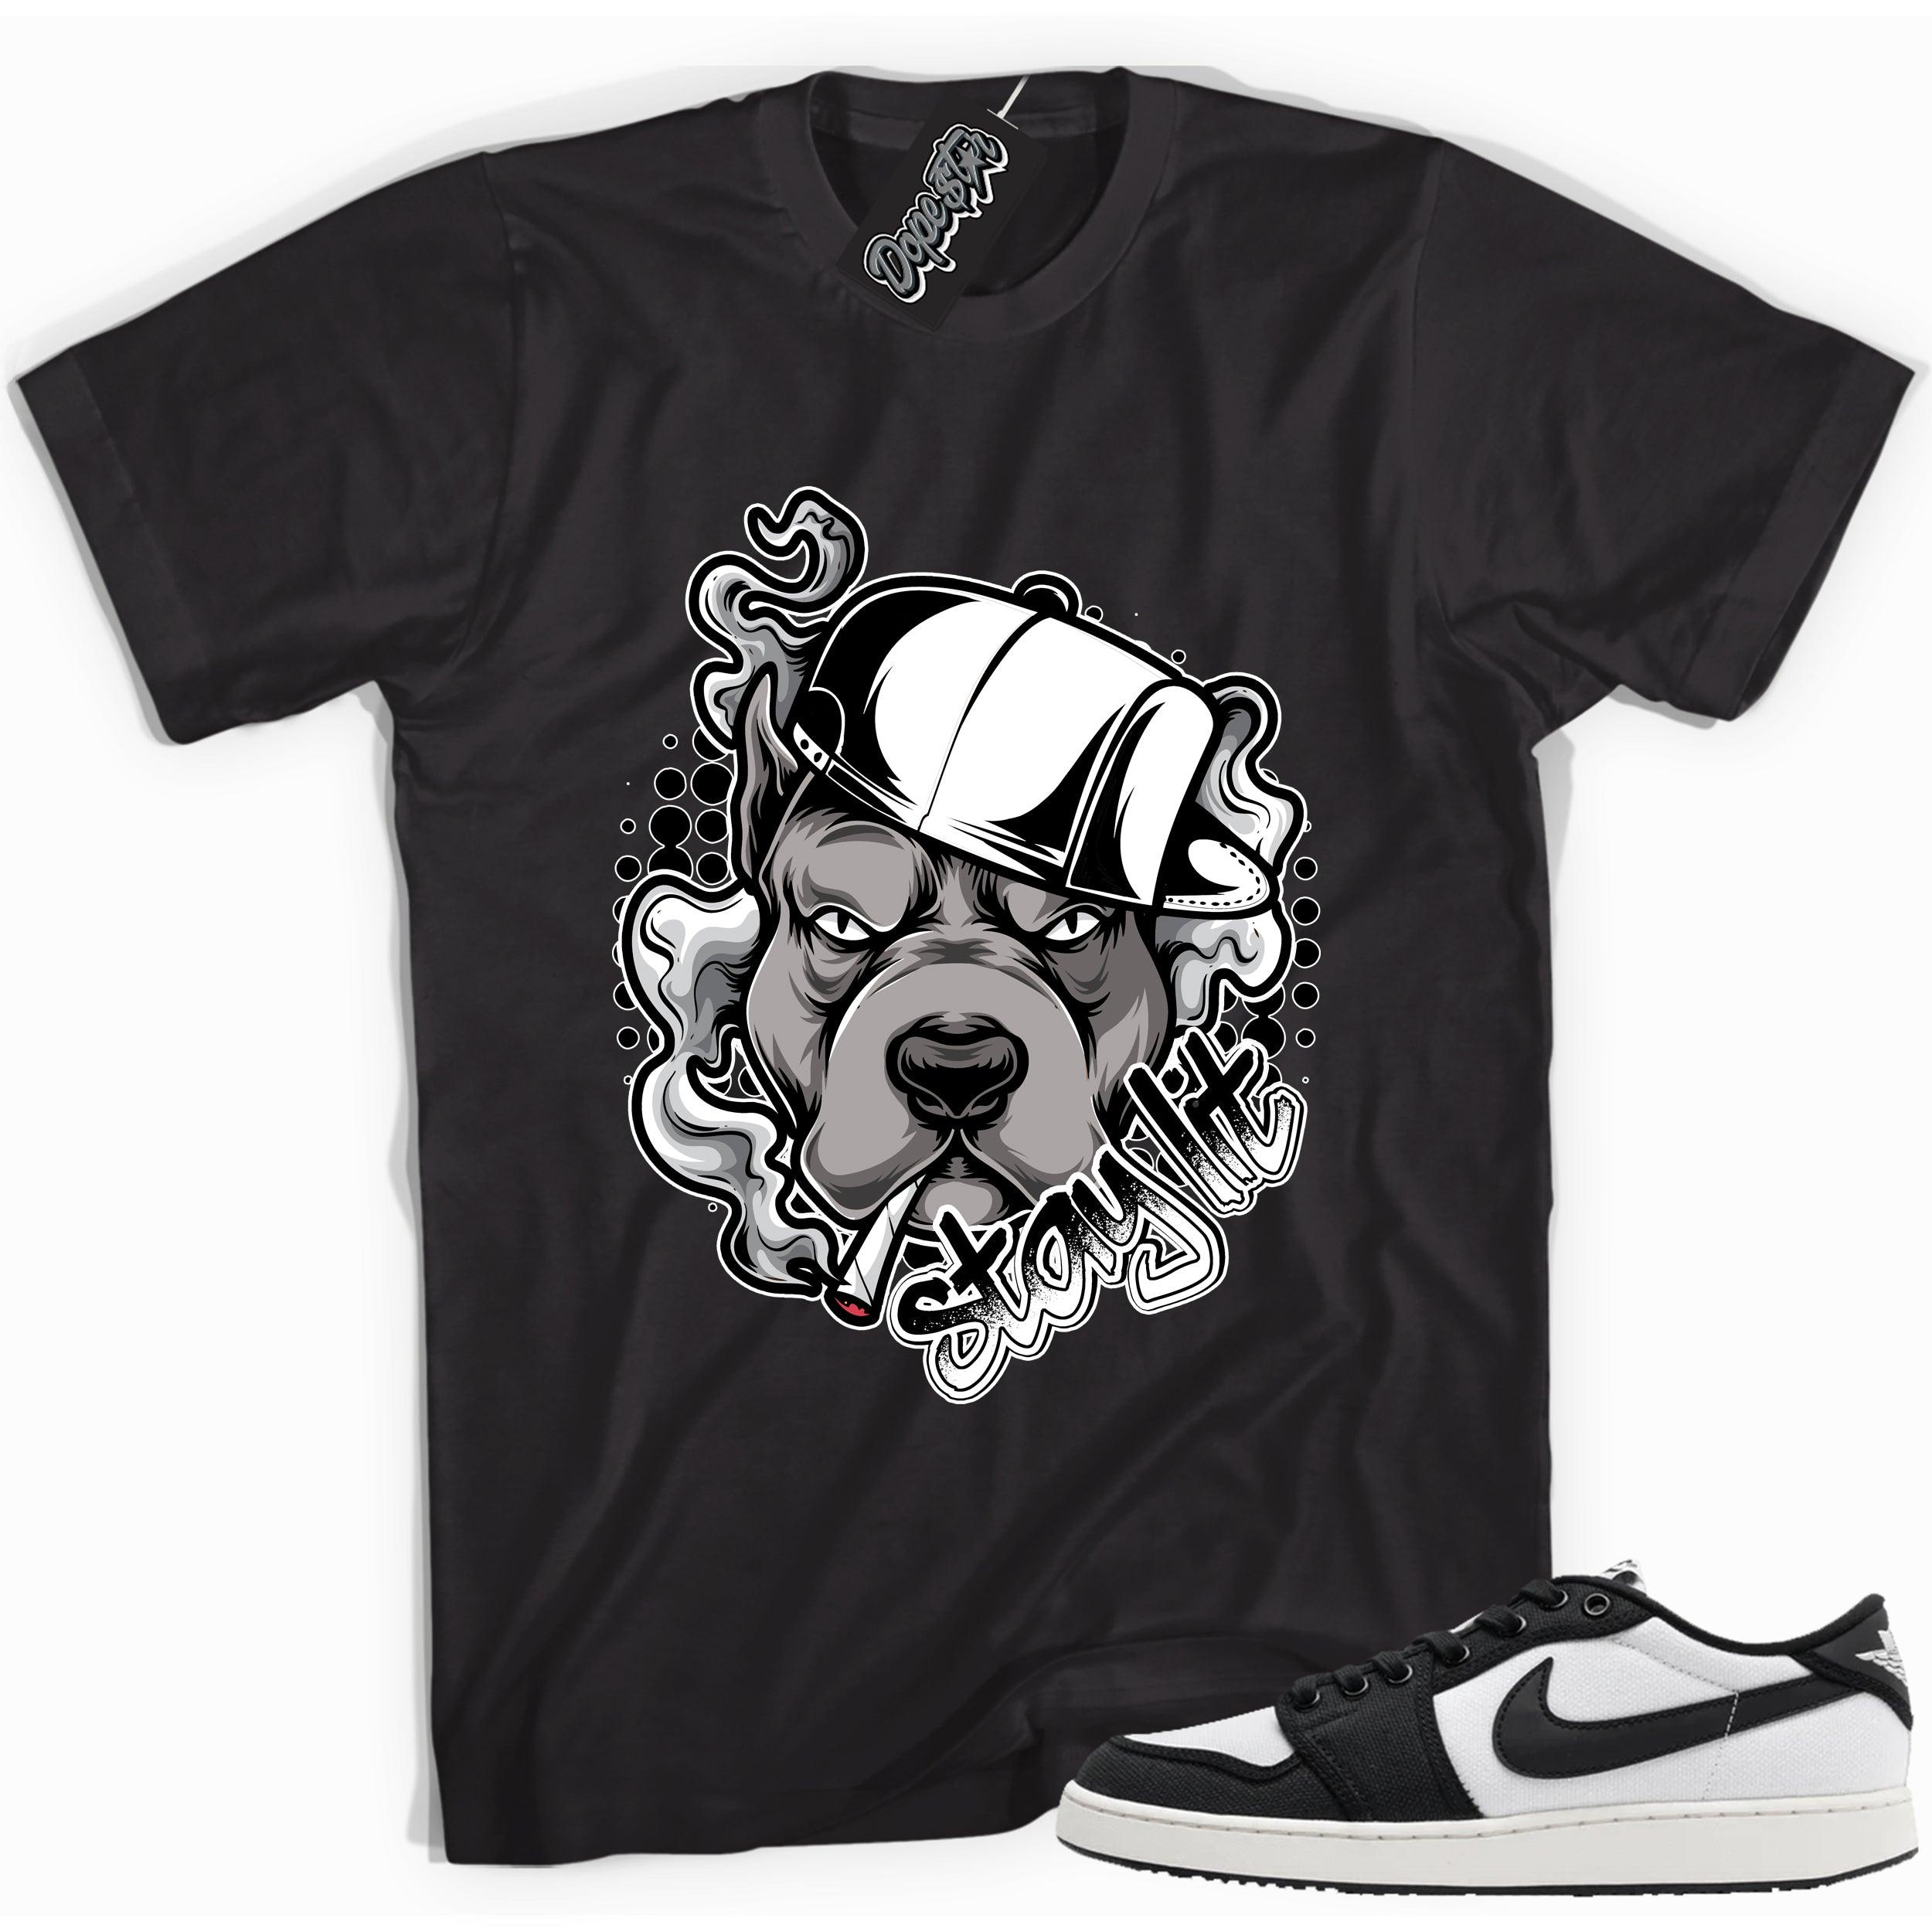 Cool black graphic tee with 'stay lit' print, that perfectly matches Air Jordan 1 Retro Ajko Low Black & White sneakers.